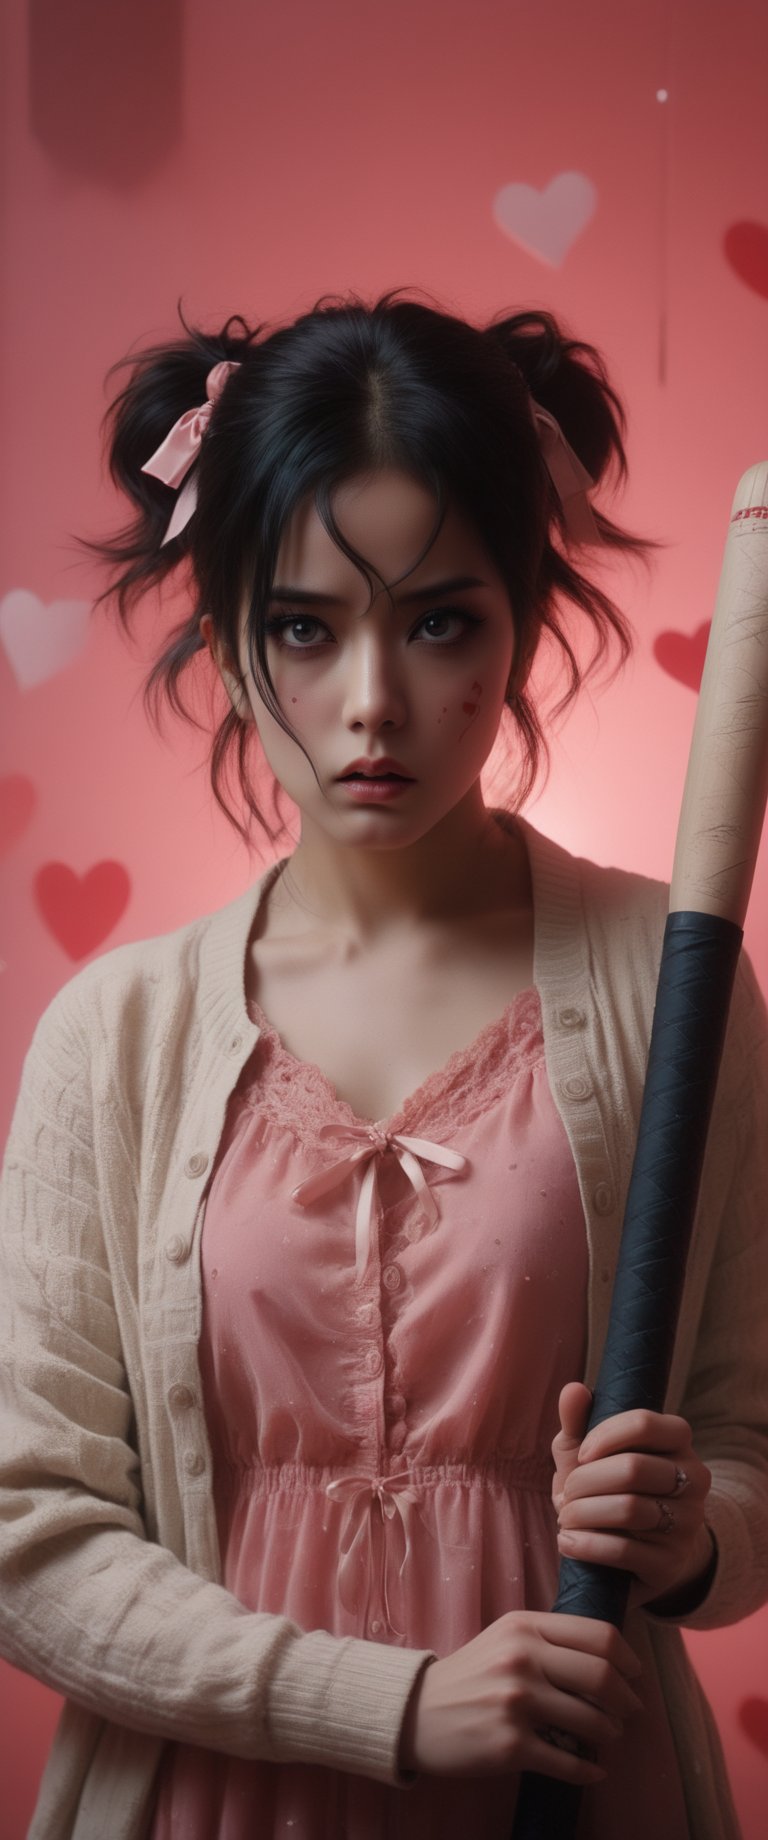 breathtaking ethereal RAW photo of female, ((best quality, 1girl, black hair, hair ornament, hairclip, black eyes, short hair, , beige cardigan, cardigan, pink dress, red ribbon, , angry,holding baseball bat, baseball bat, blushing, looking at viewer, hearts, sparkles, pink background, 5 fingers, perfect hands



 )), dark and moody style, perfect face, outstretched perfect hands. masterpiece, professional, award-winning, intricate details, ultra high detailed, 64k, dramatic light, volumetric light, dynamic lighting, Epic, splash art .. ), by james jean $, roby dwi antono $, ross tran $. francis bacon $, michal mraz $, adrian ghenie $, petra cortright $, gerhard richter $, takato yamamoto $, ashley wood, tense atmospheric, , , , sooyaaa,IMGFIX,Comic Book-Style,Movie Aesthetic,action shot,photo r3al ,bad quality image,oil painting, cinematic moviemaker style,Japan Vibes,H effect,koh_yunjung ,koh_yunjung,kwon-nara,sooyaaa,colorful,bones,skulls,armor,han-hyoju-xl
,DonMn1ghtm4reXL, ct-fujiii,ct-jeniiii, ct-goeuun,mad-cyberspace,FuturEvoLab-mecha,cinematic_grain_of_film,a frame of an animated film of,score_9,3D,style akirafilm,Wellington22A,Mina Tepes,lucia:_plume_(sinful_oath )_(punishing:_g,VAMPL, FANG-L ,kizuki_rei, ct-eujiiin,Jujutsu Kaisen Season 2 Anime Style,ChaHaeInSL,Mavelle,Uguisu Anko,Zenko,ct-virtual